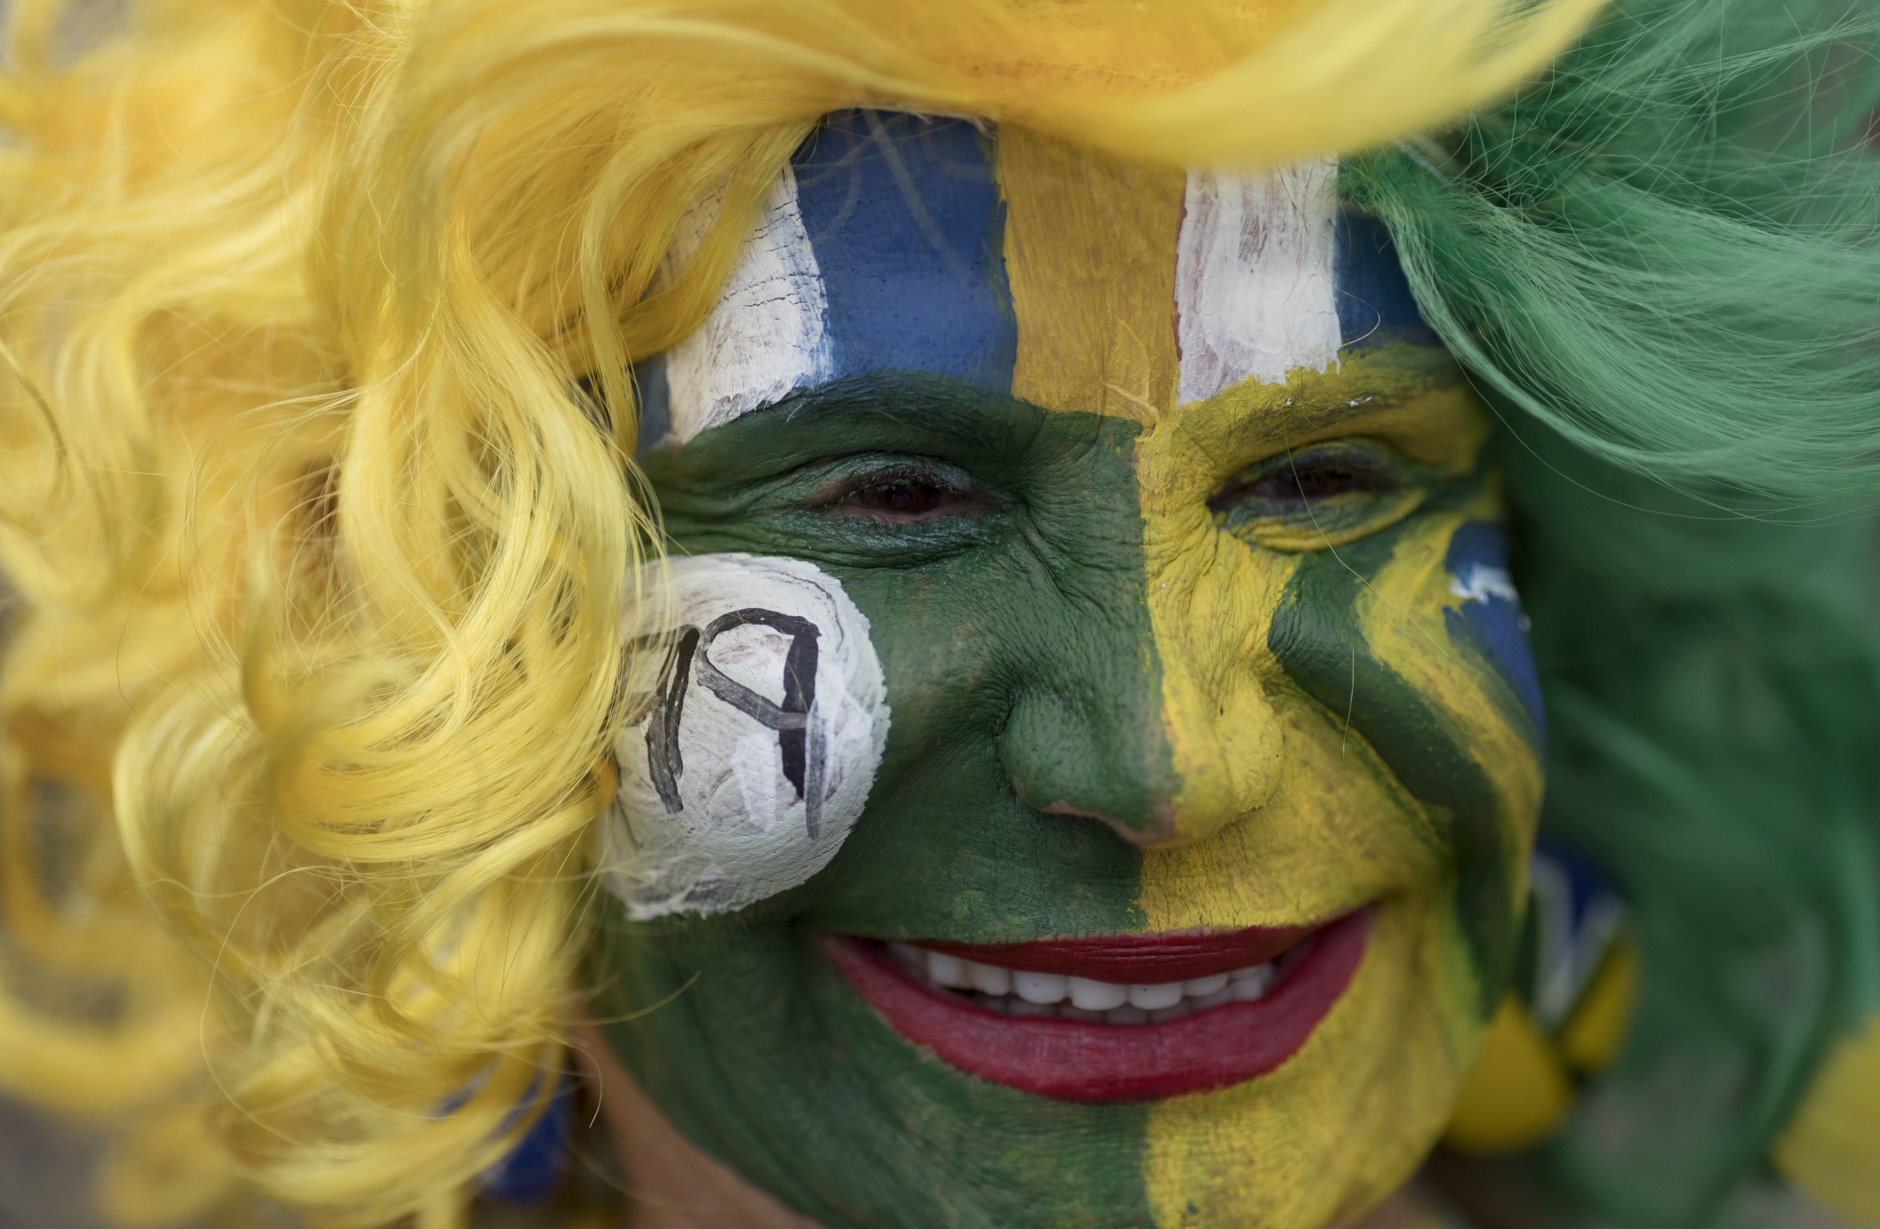 A Brazil soccer fan in costume waits for the start of a live broadcast of a 2018 Russia World Cup soccer match between Brazil and Mexico in Rio de Janeiro, Brazil, Monday, July 2, 2018. (AP Photo/Leo Correa)